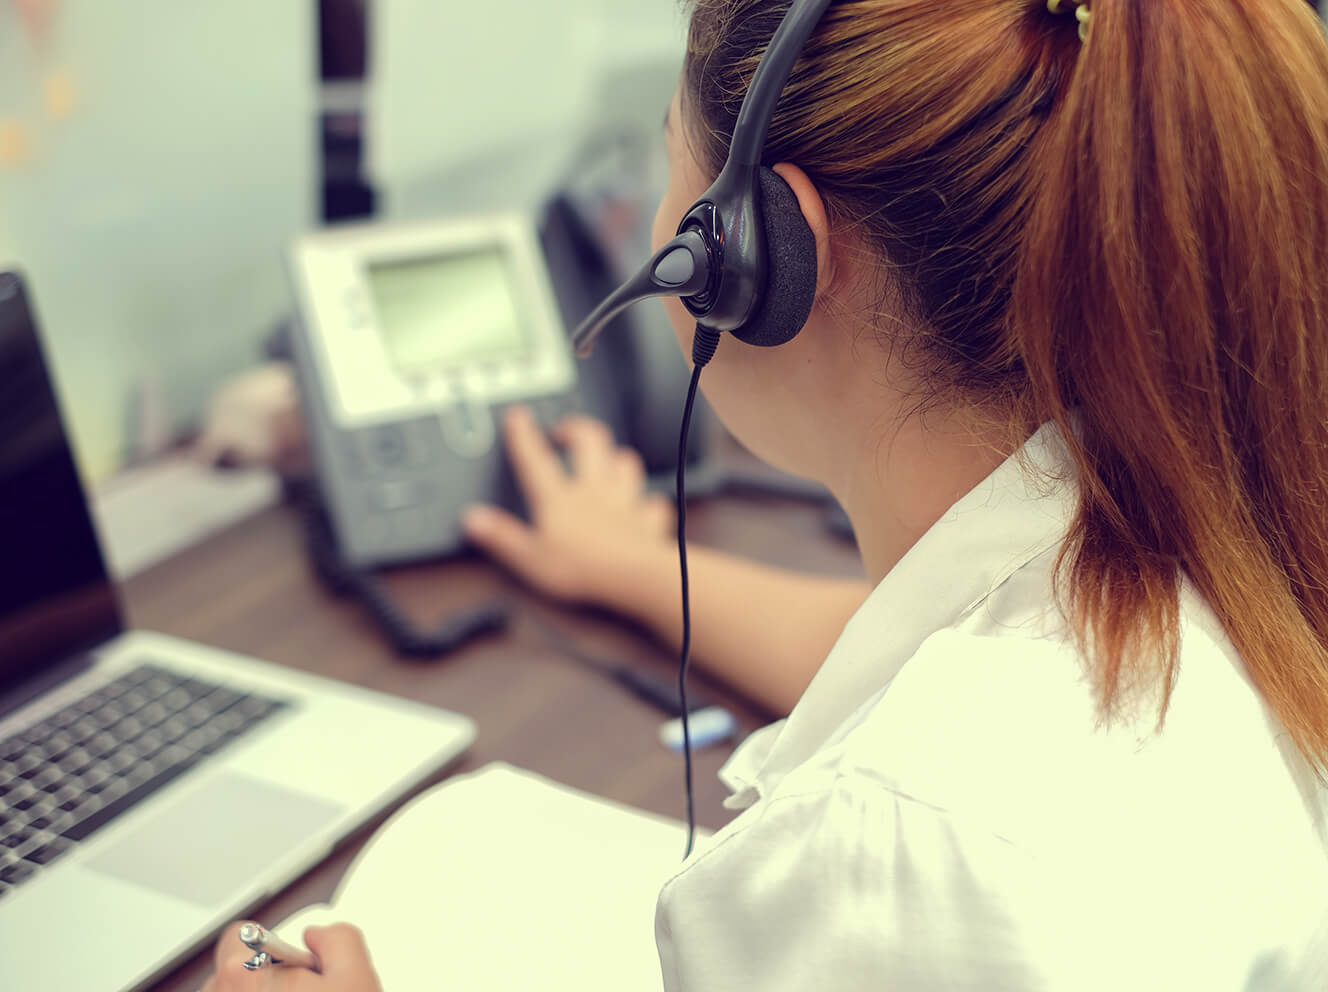 Woman making phonecall with headset on and at computer